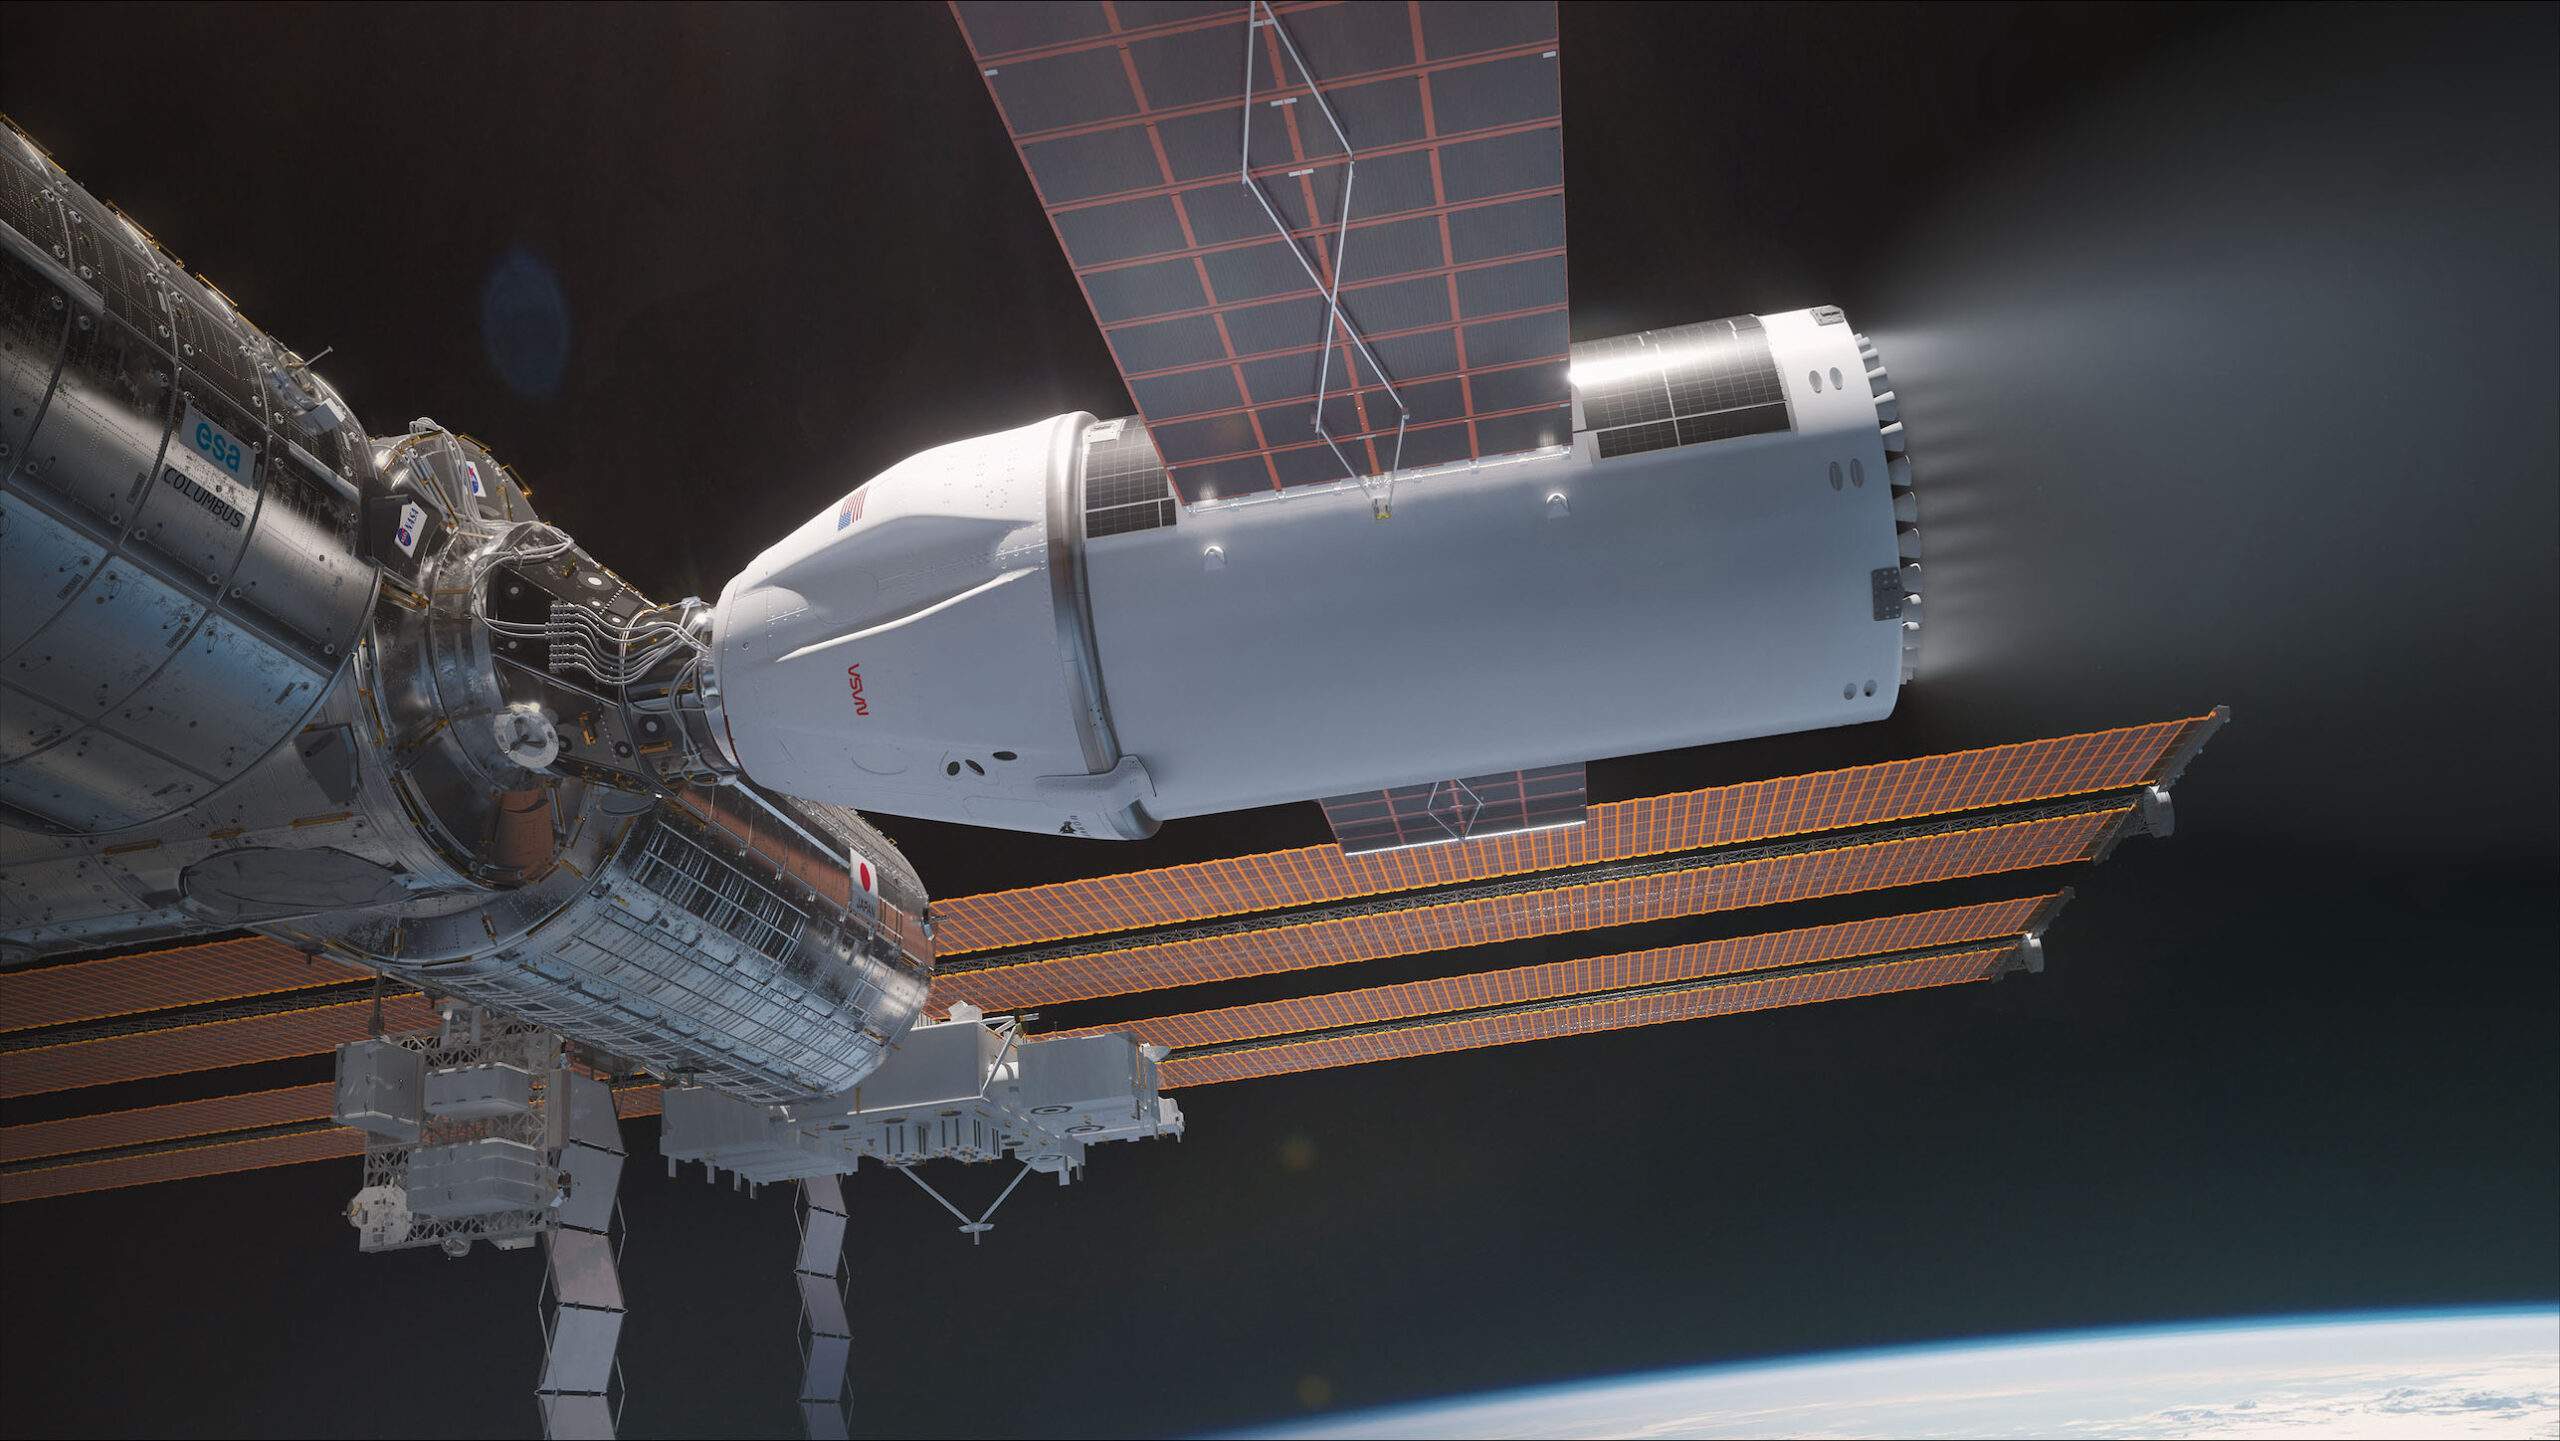 Here is SpaceX’s Deorbit spacecraft, which will deorbit the International Space Station.